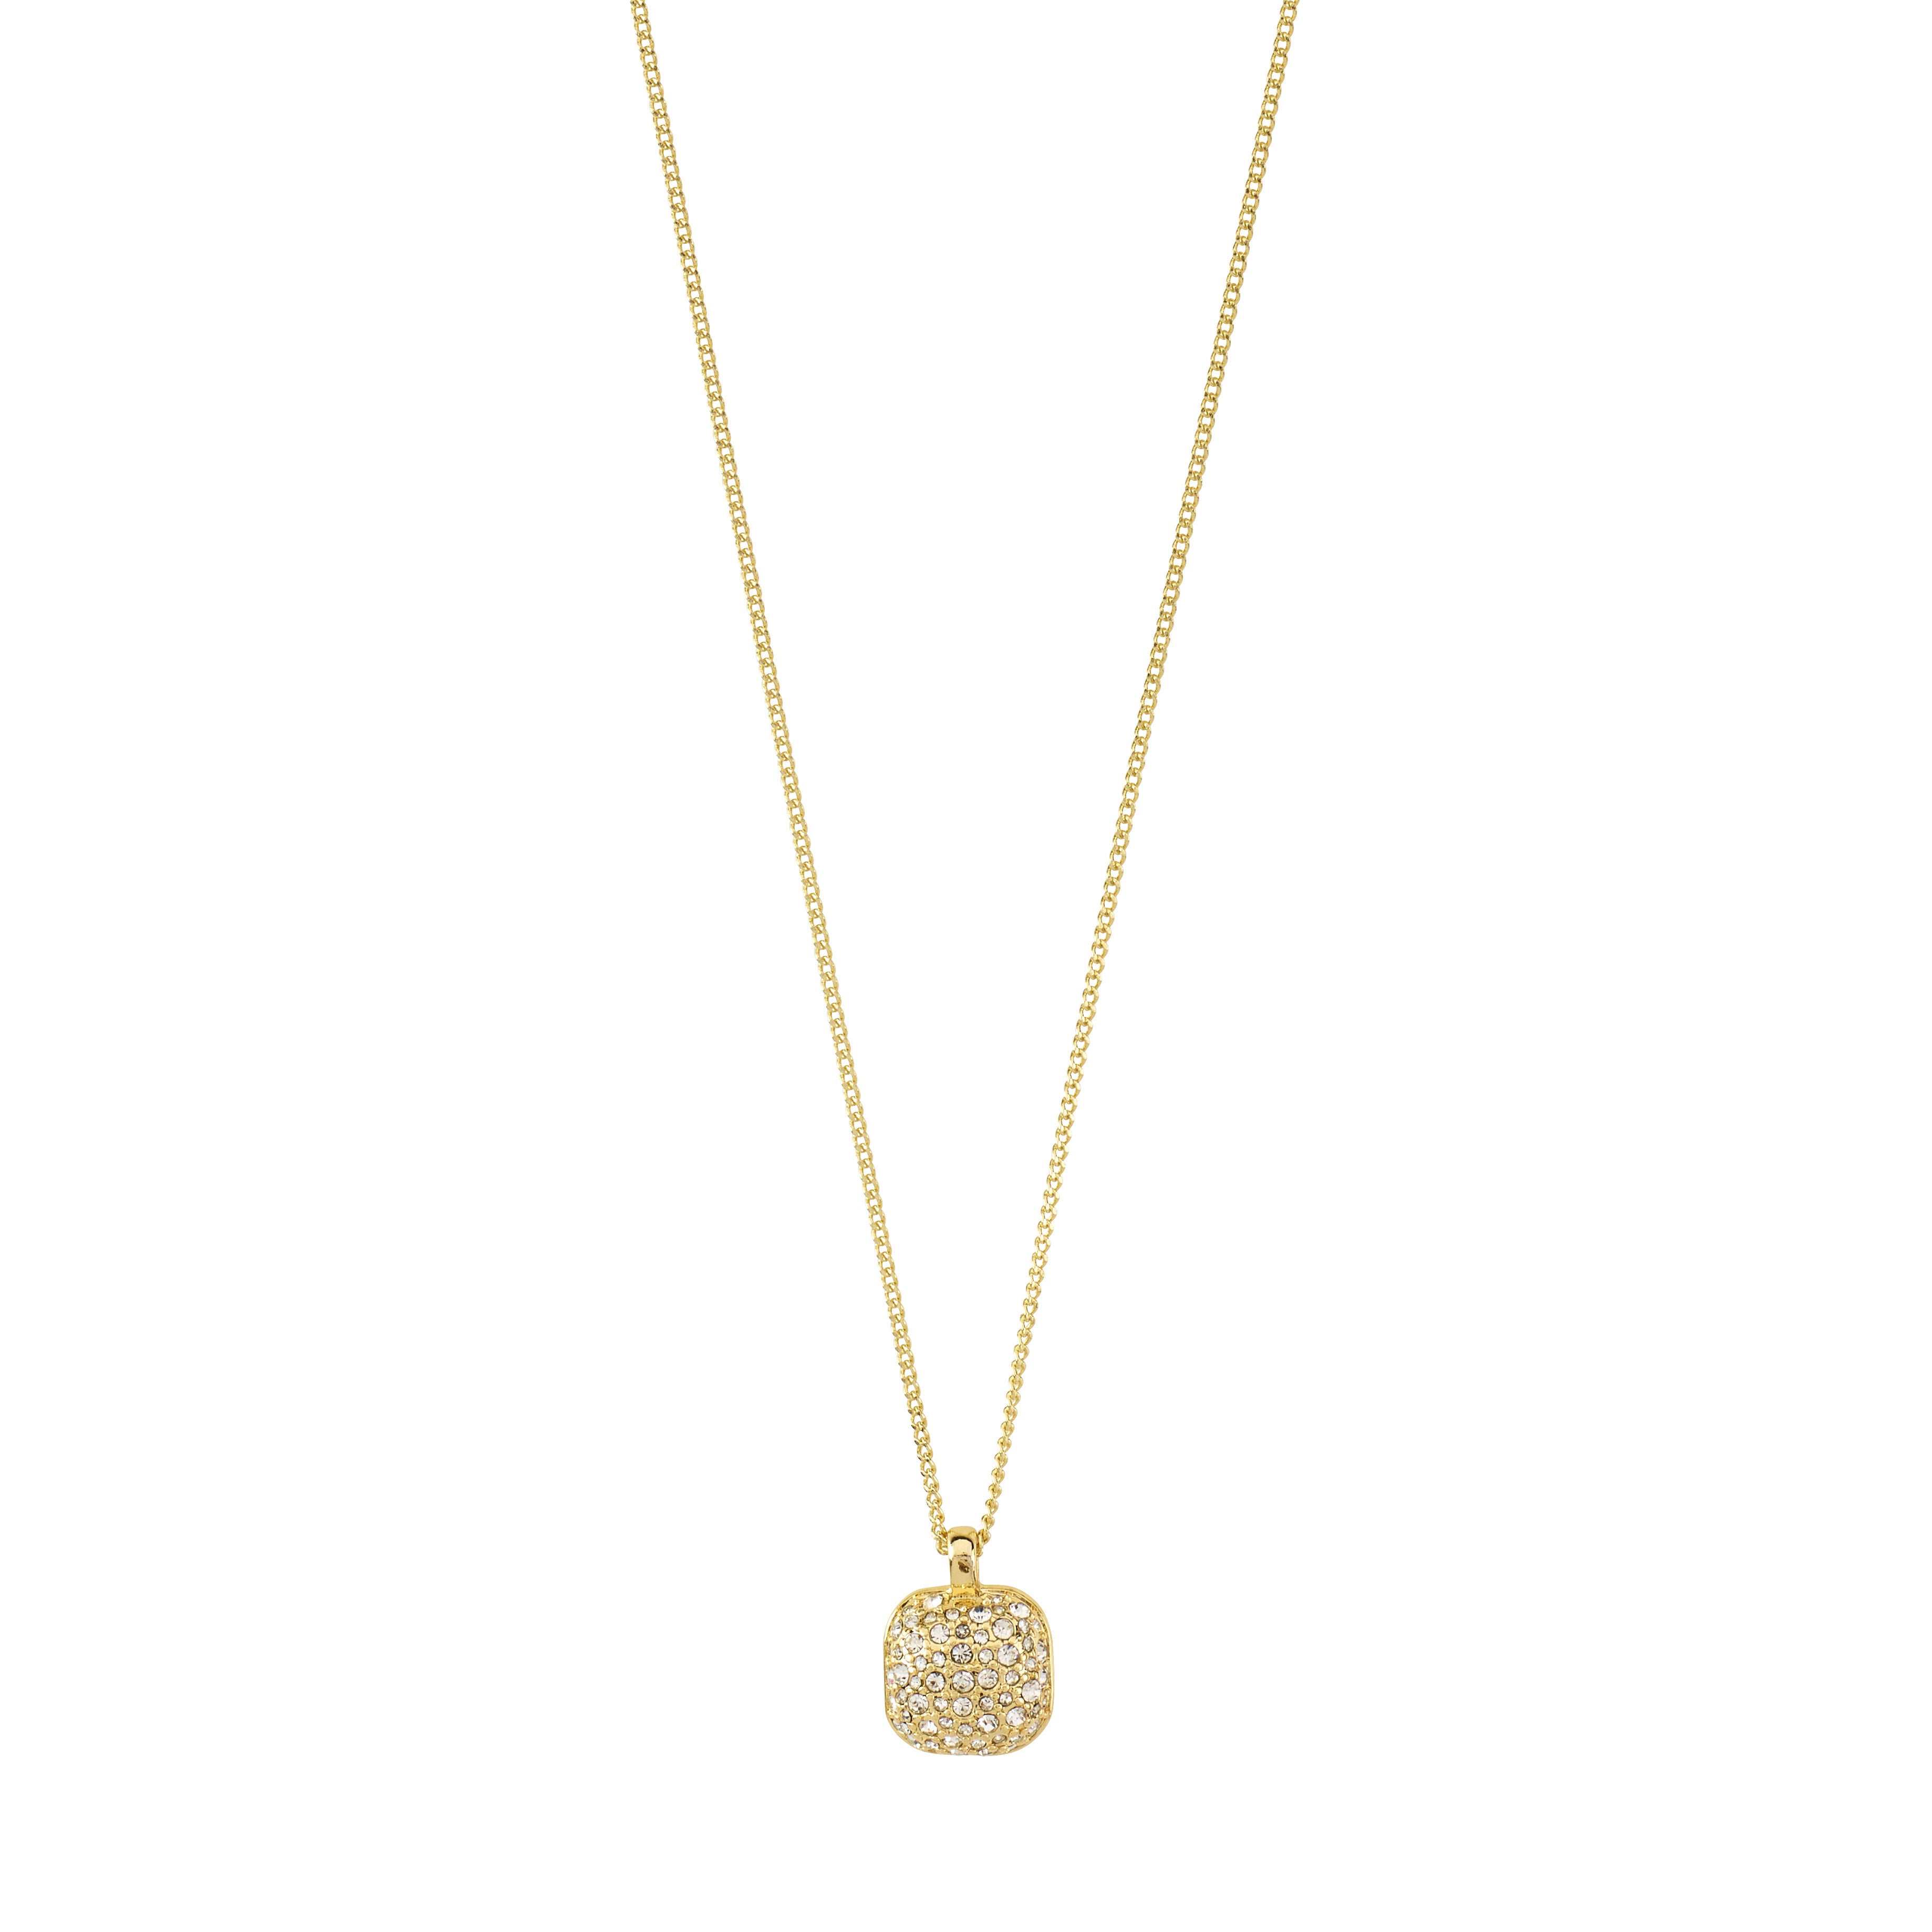 CINDY recycled crystal pendant necklace gold-plated